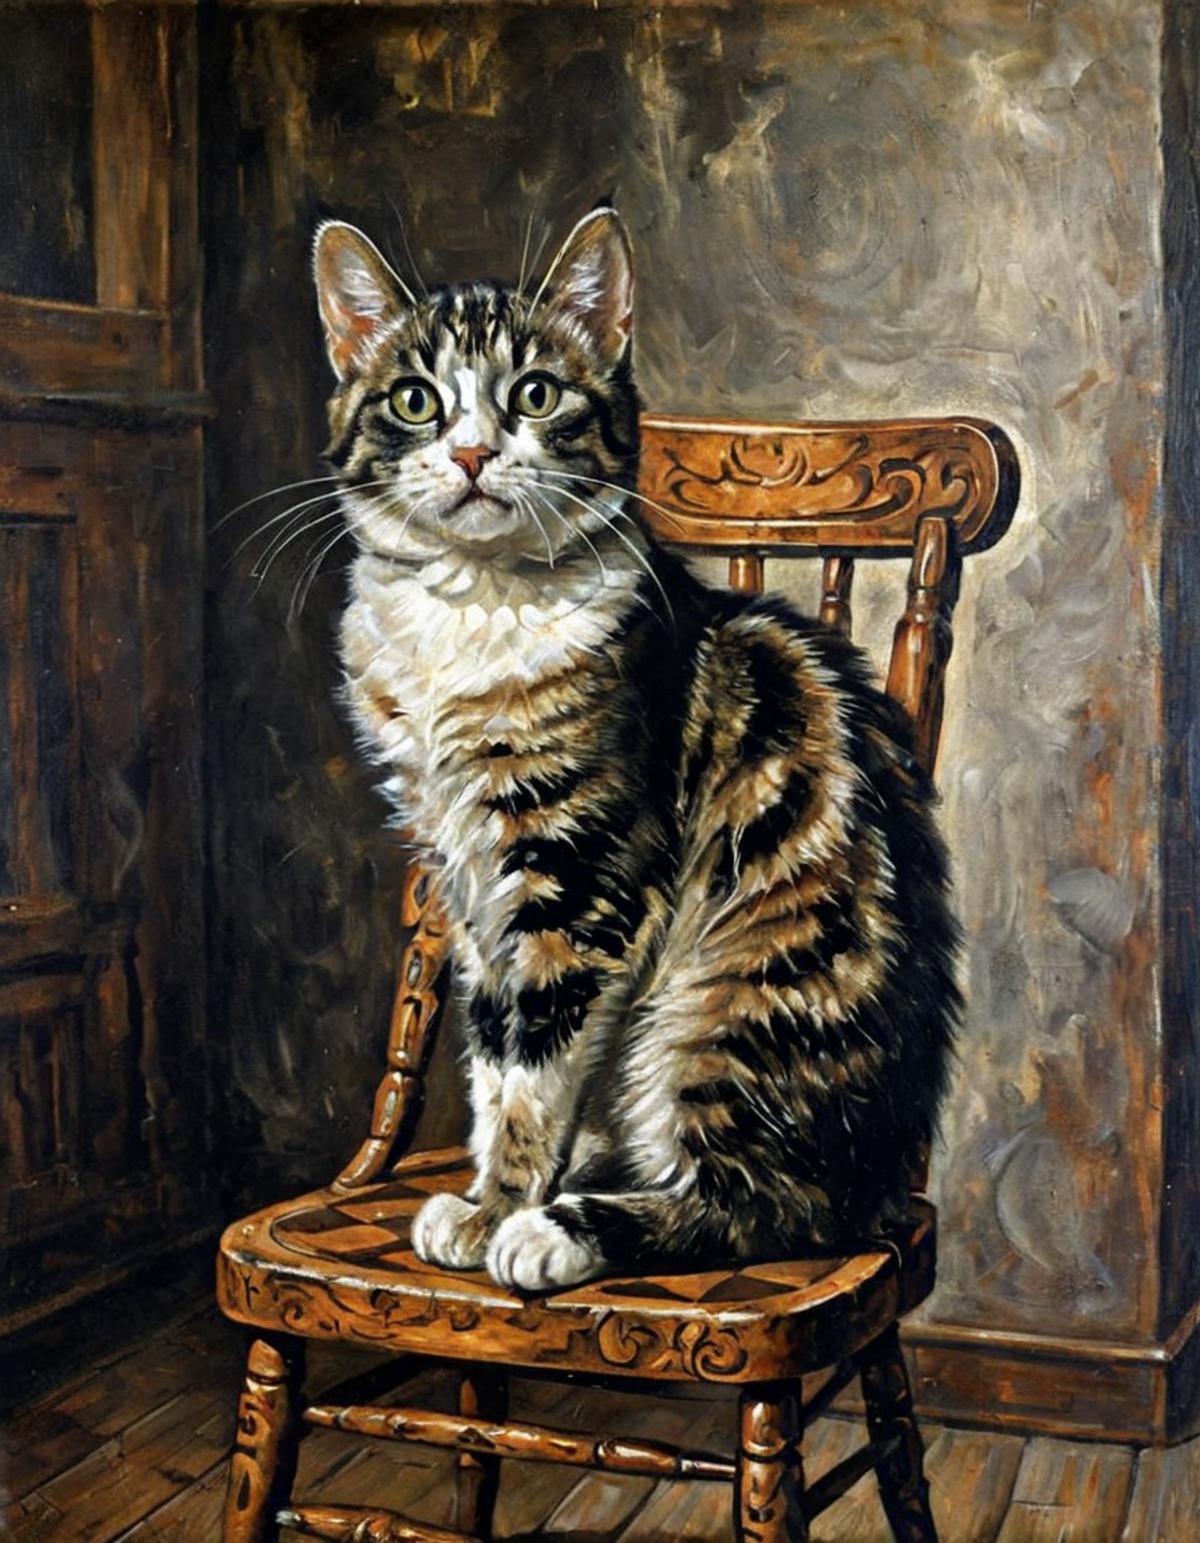 A cat sitting on a wooden chair with an intricate design.